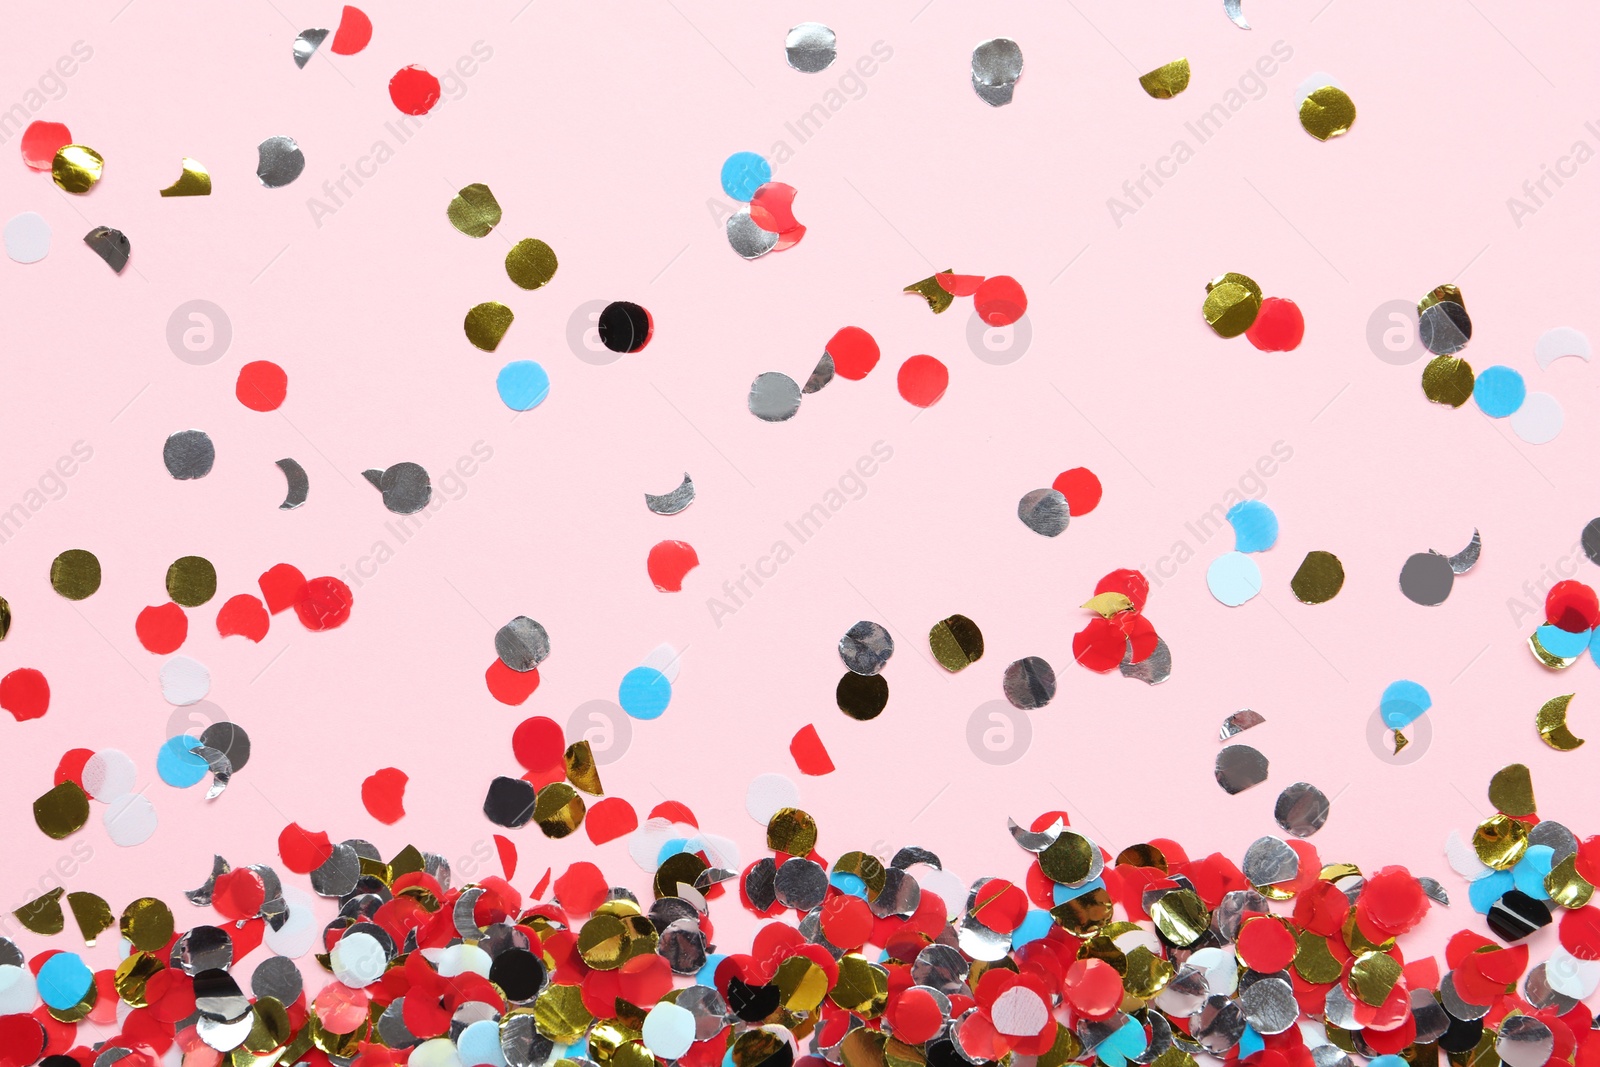 Photo of Shiny colorful confetti on light pink background, flat lay